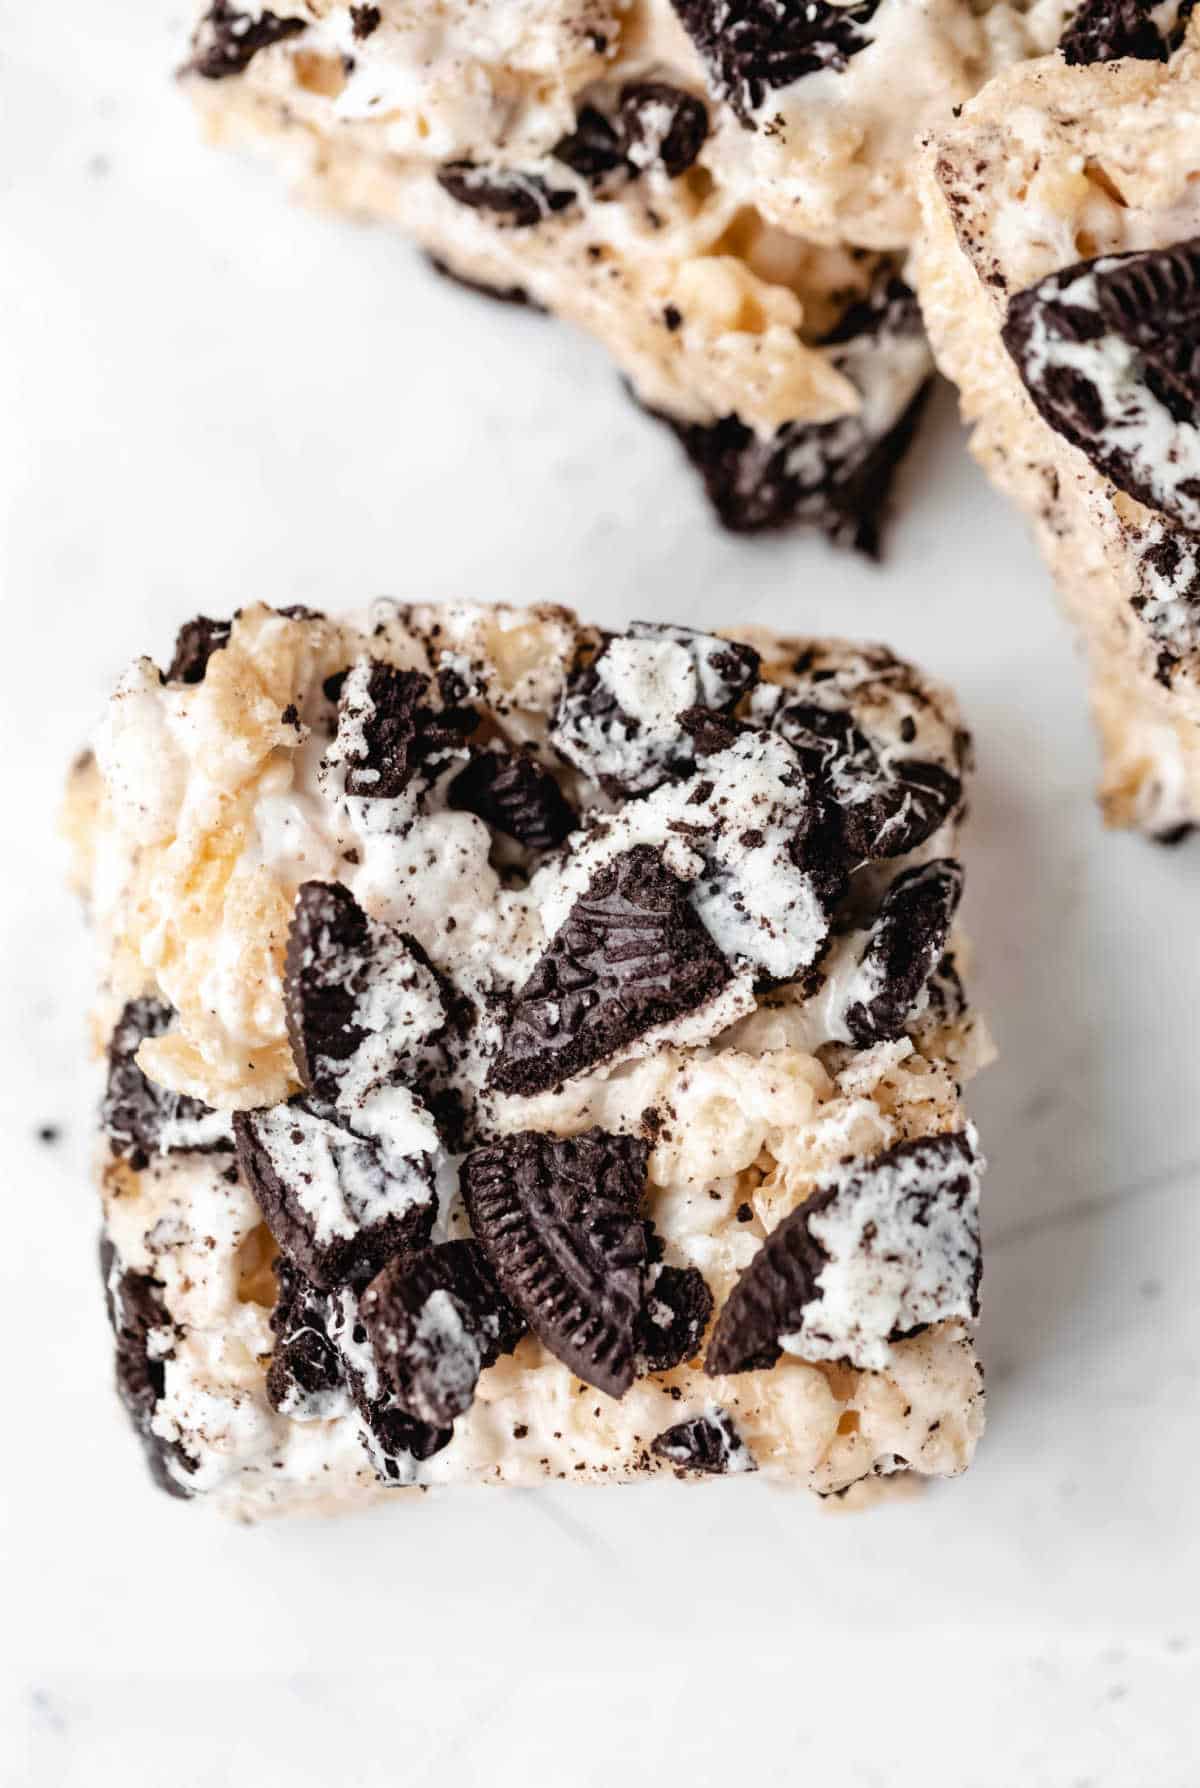 Oreo rice krispies treat on a piece of parchment paper.